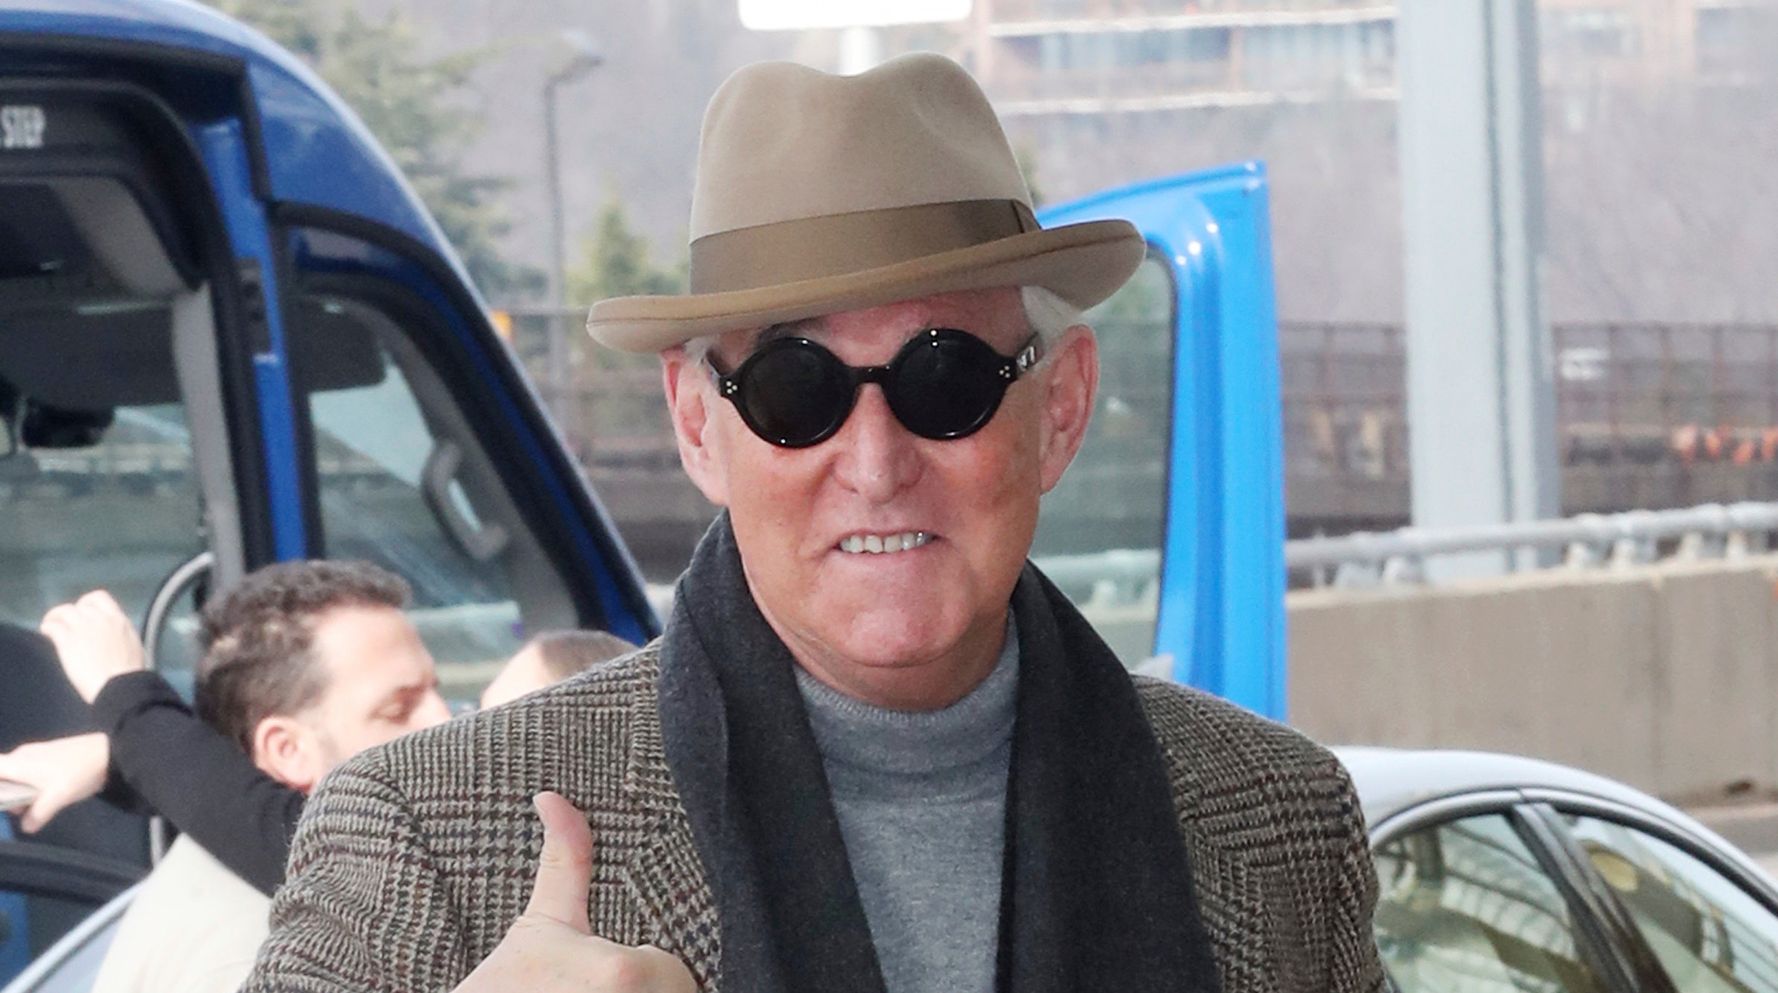 Federal Judge Says Roger Stone Faces Jail Time Over Instagram Posts.